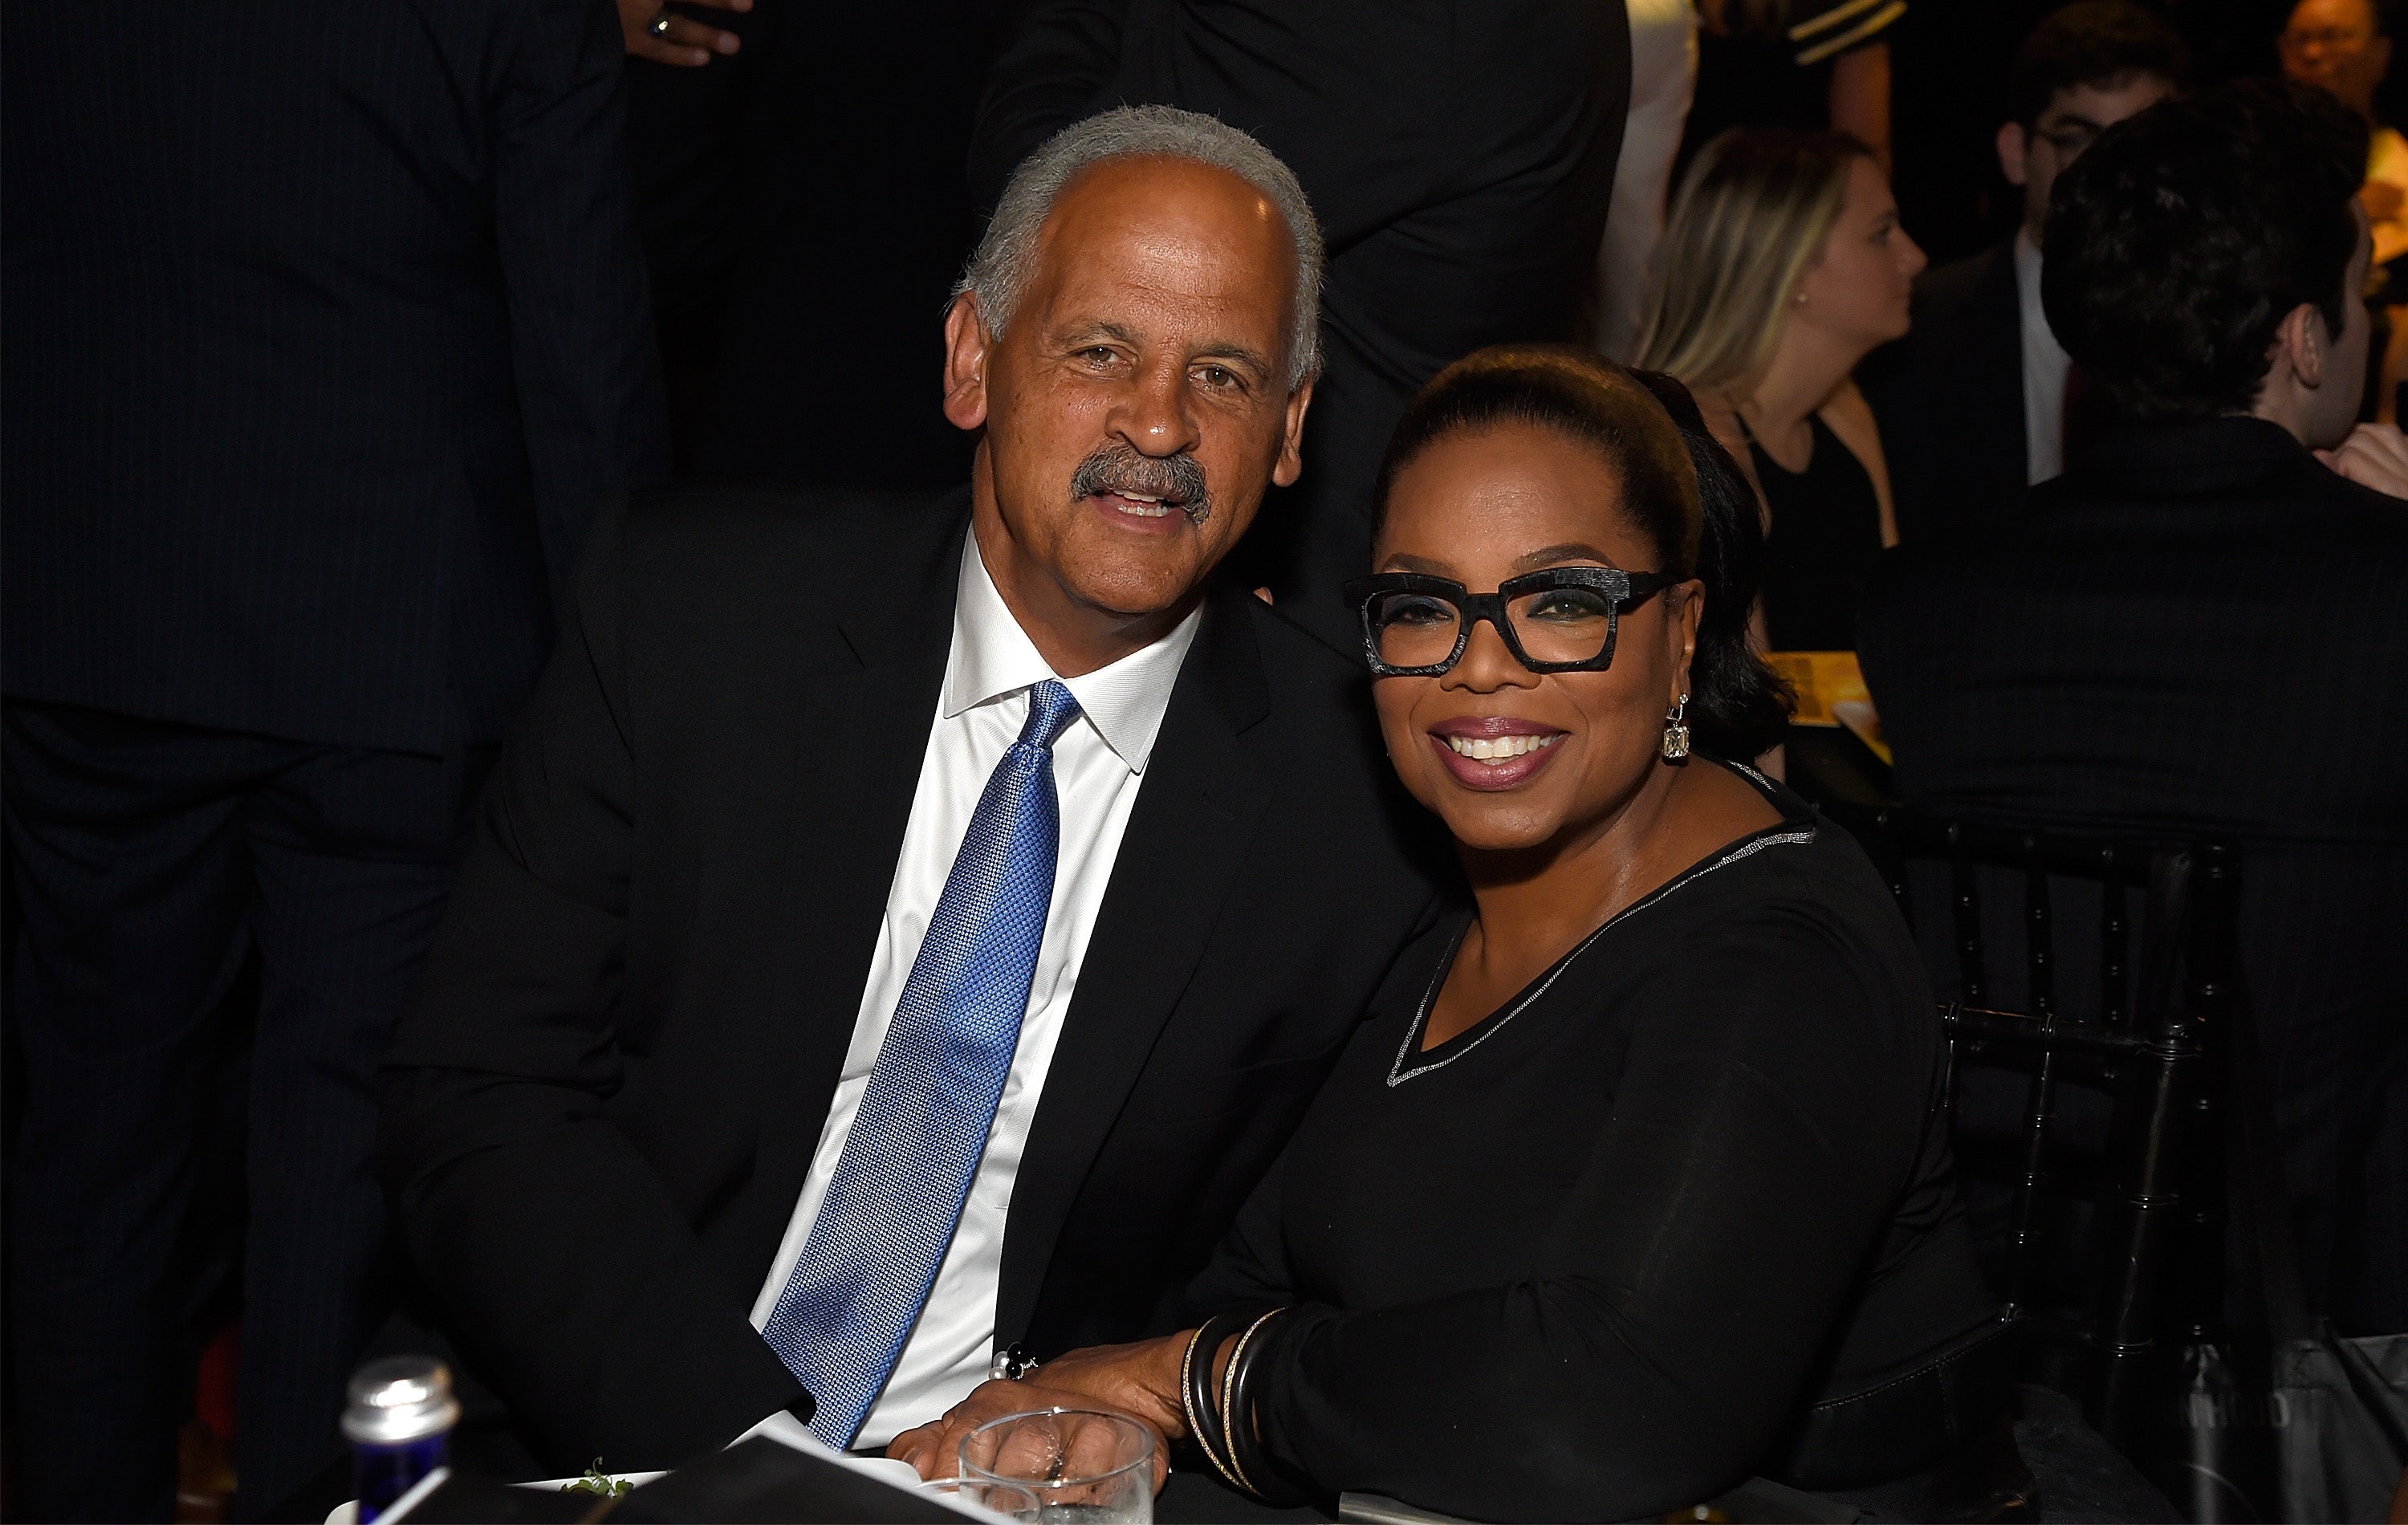 Stedman Graham Shares The Secret To His Lasting Relationship With Oprah Winfrey